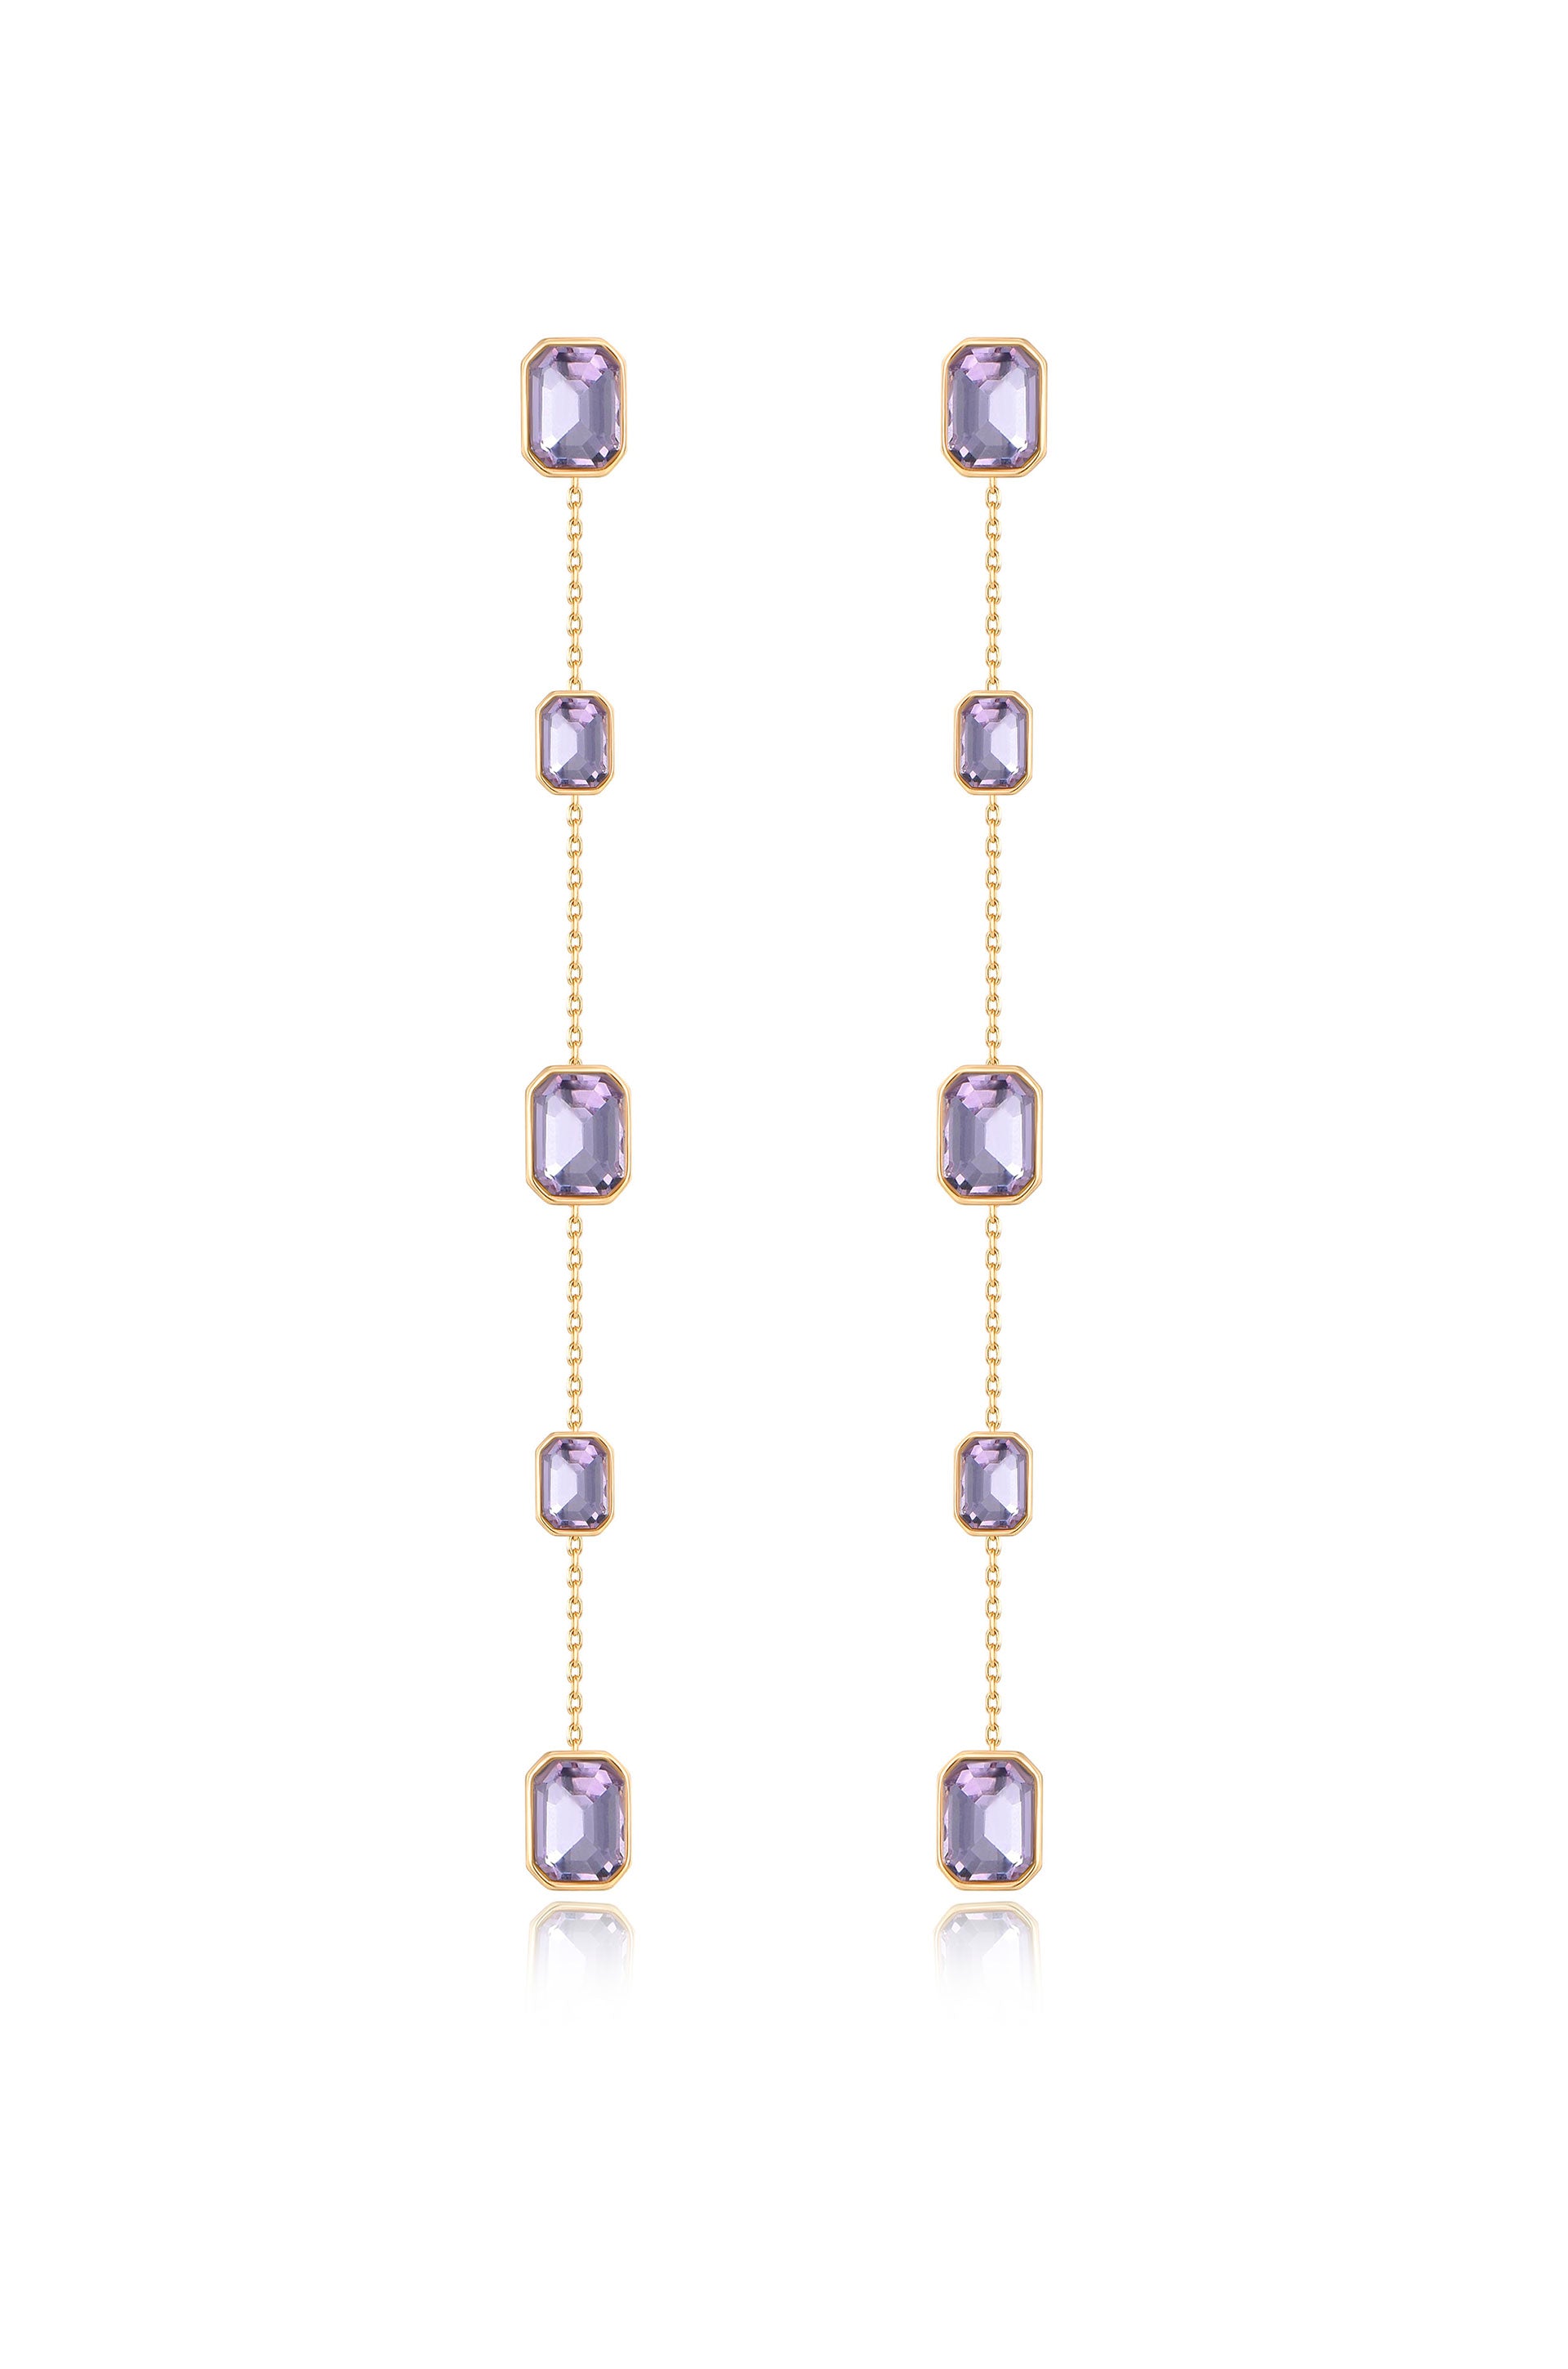 Iconic Crystal Dangle Earrings in light amethyst crystals